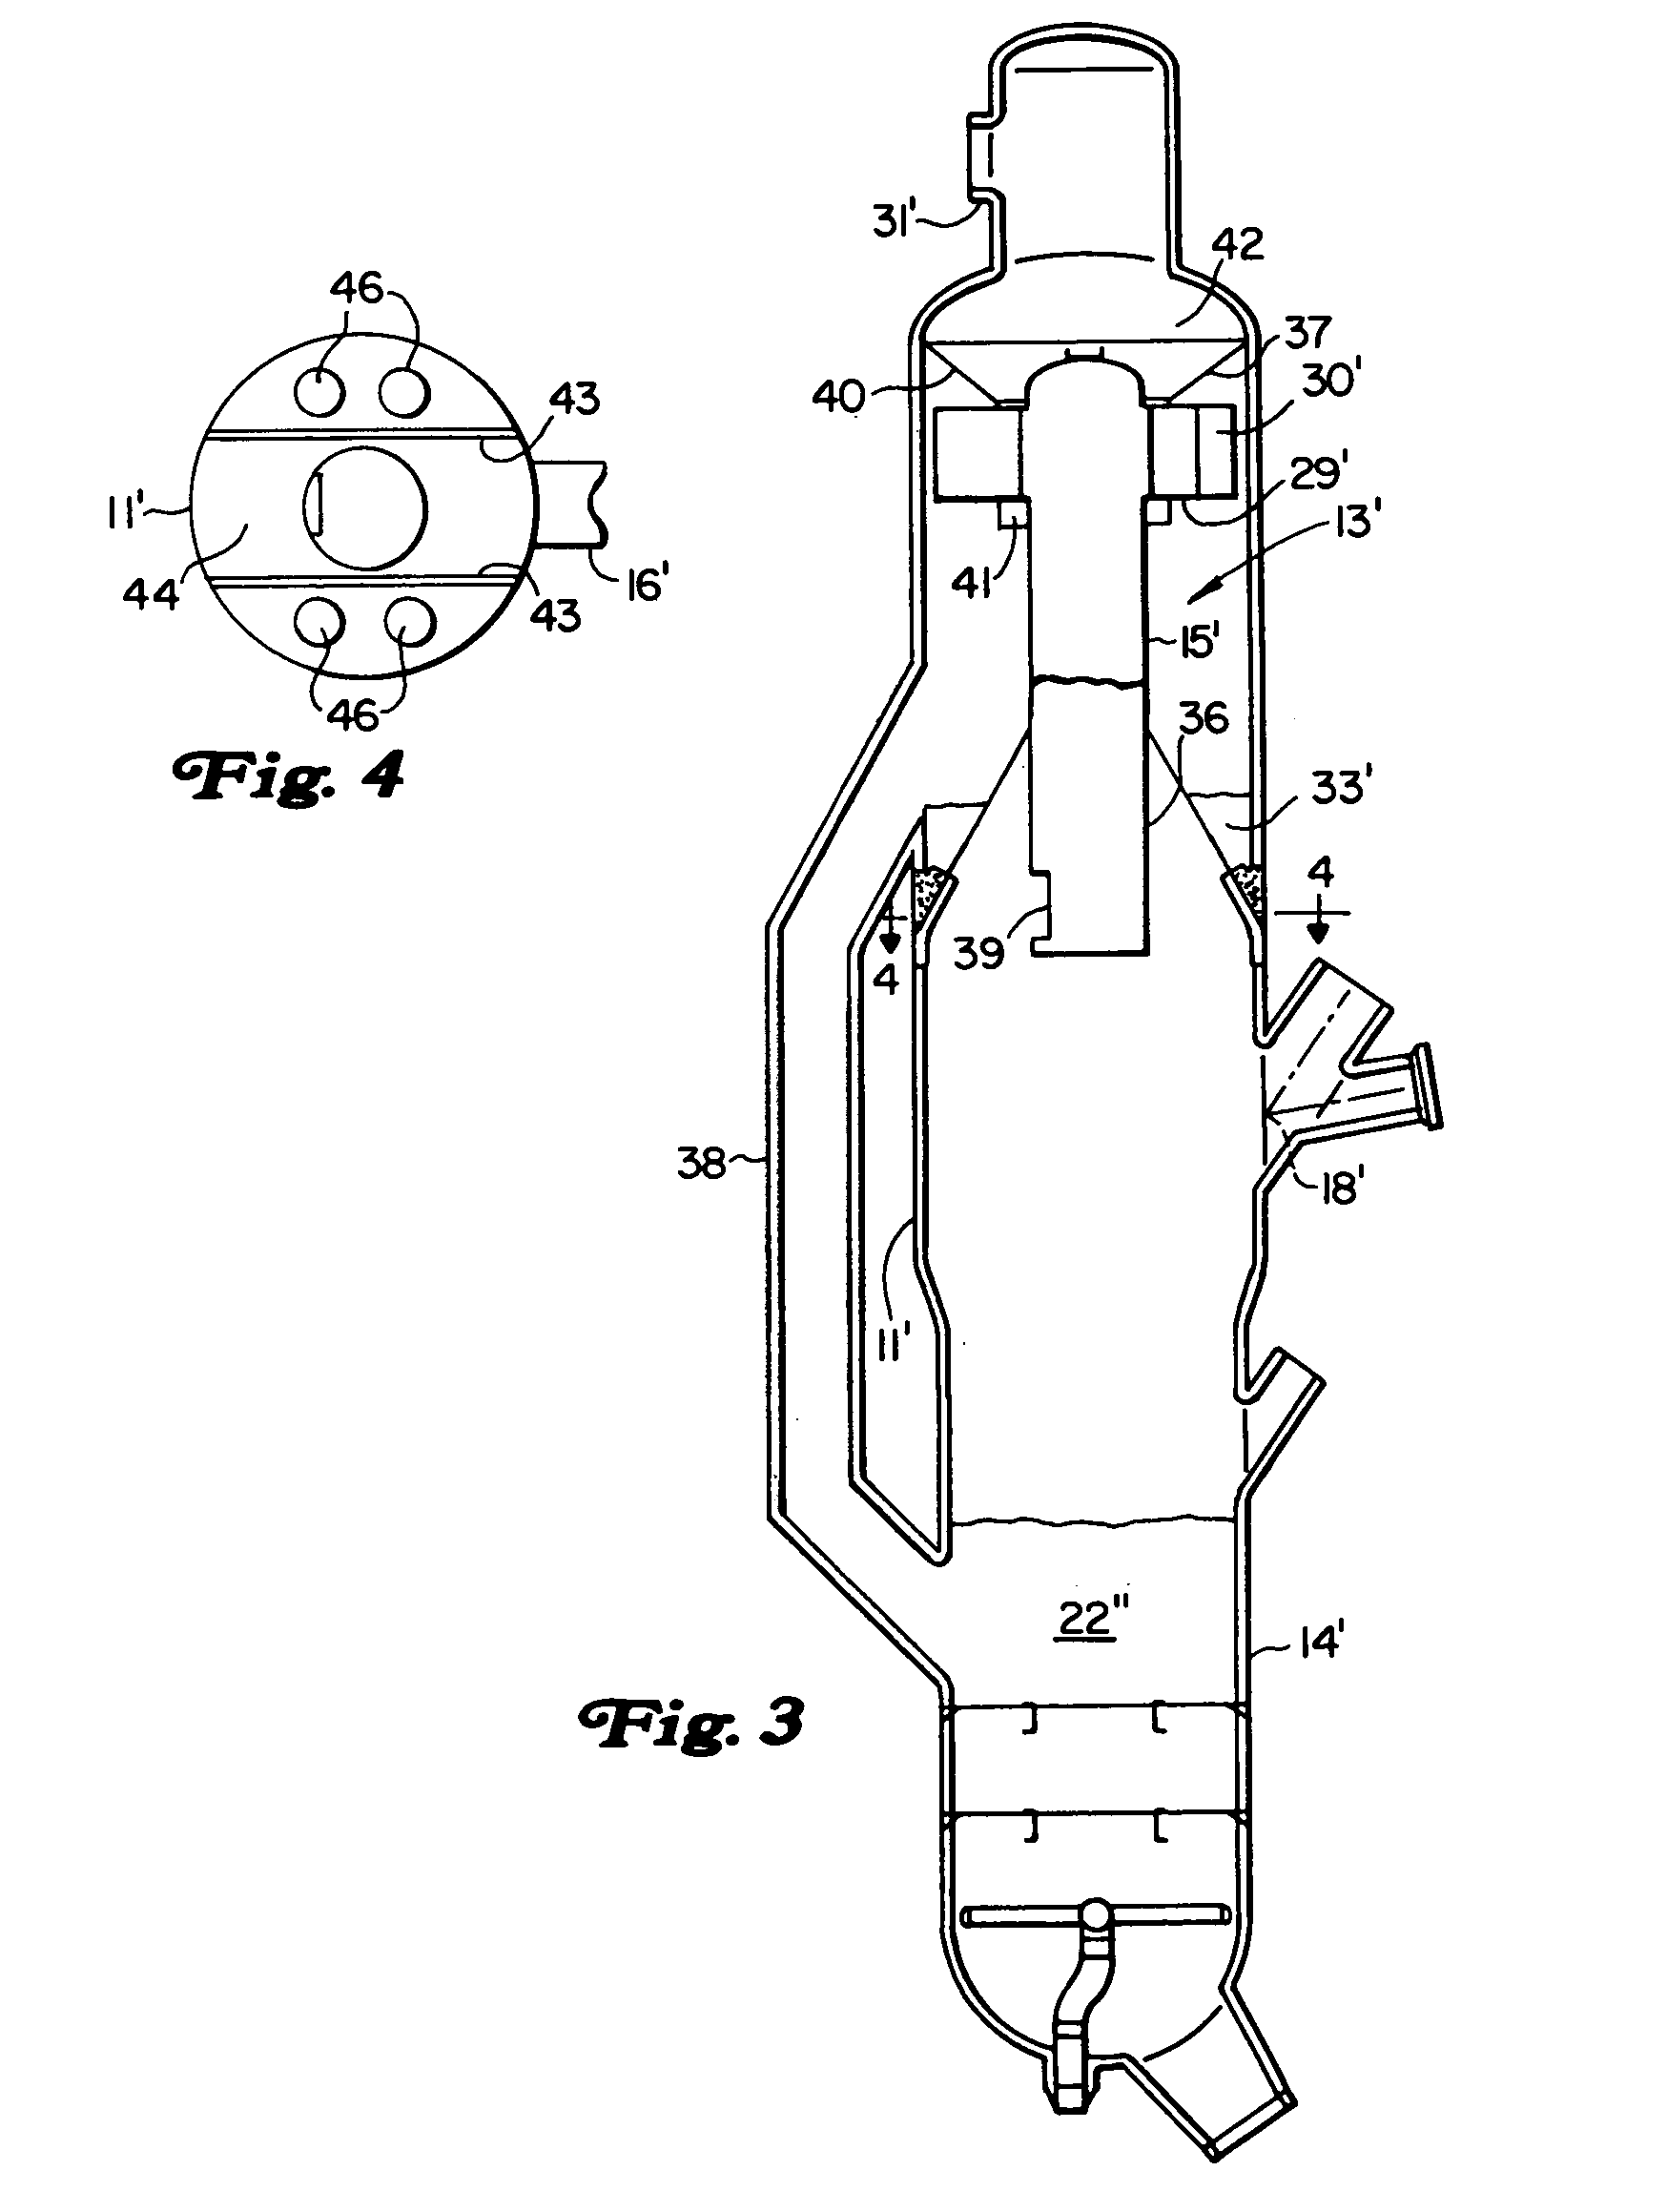 Apparatus for feed contacting with immediate catalyst separation